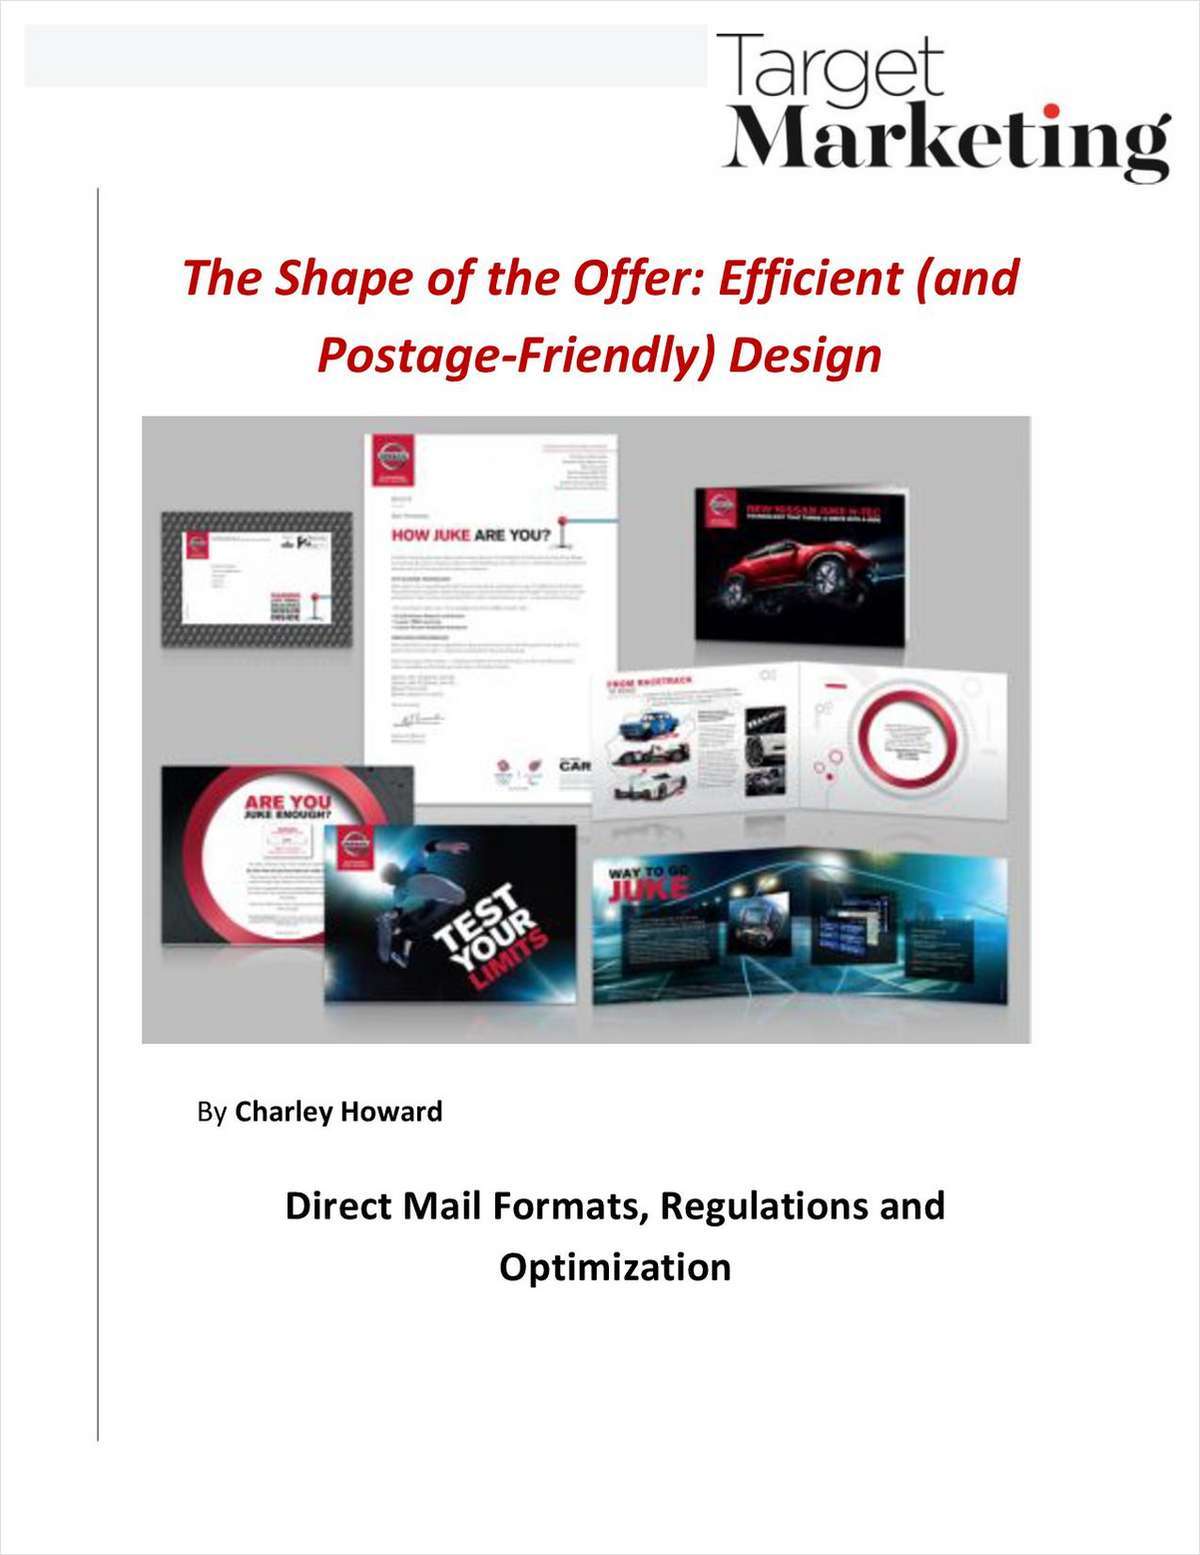 The Shape of the Offer: Efficient (and Postage-Friendly) Design